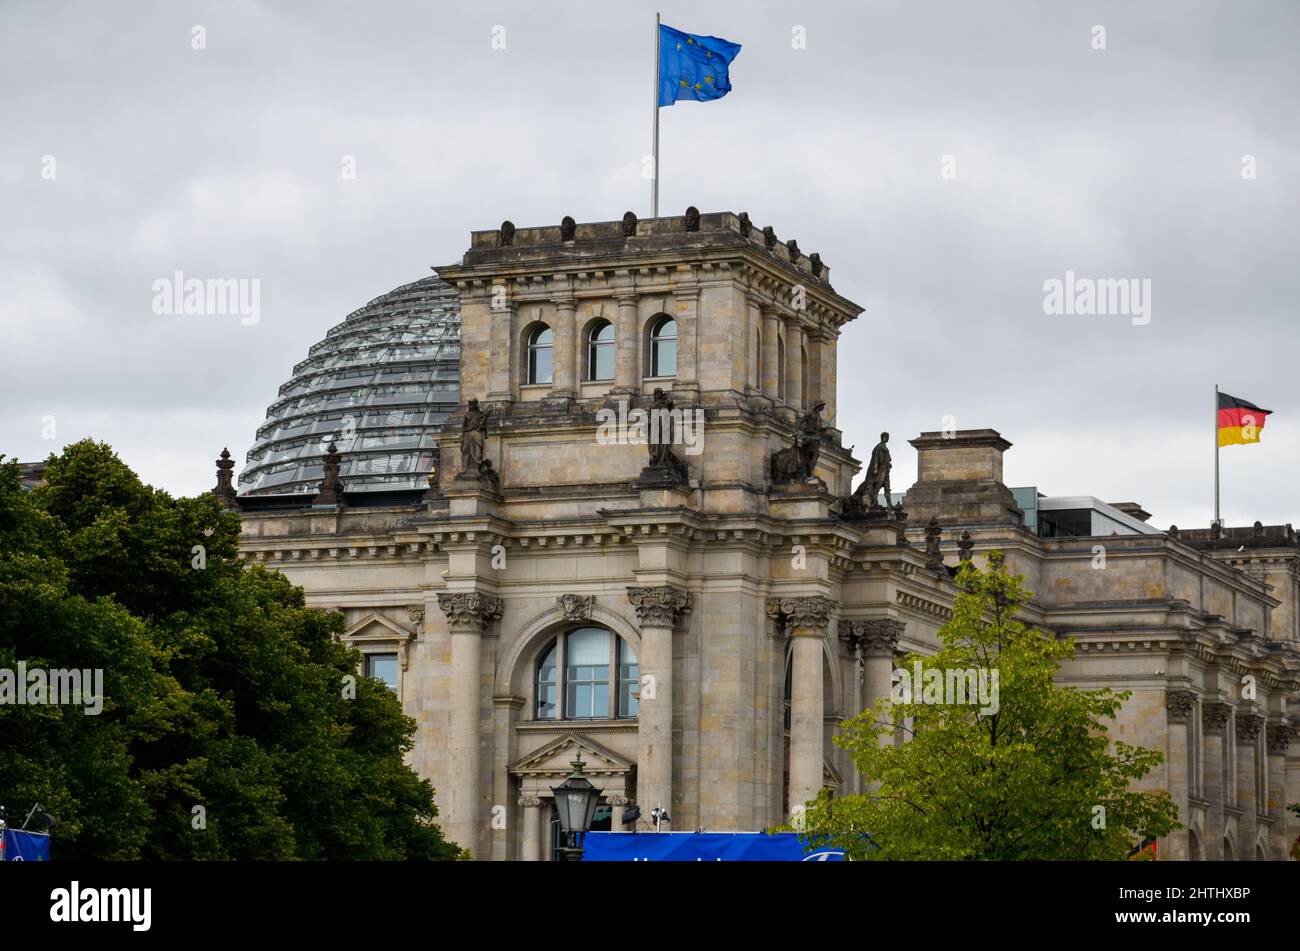 Berlin, Berlin, Germany - June 20 2014: View of the tower with the European flag of the Reichstag building in Berlin with the large Reichstag dome in Stock Photo